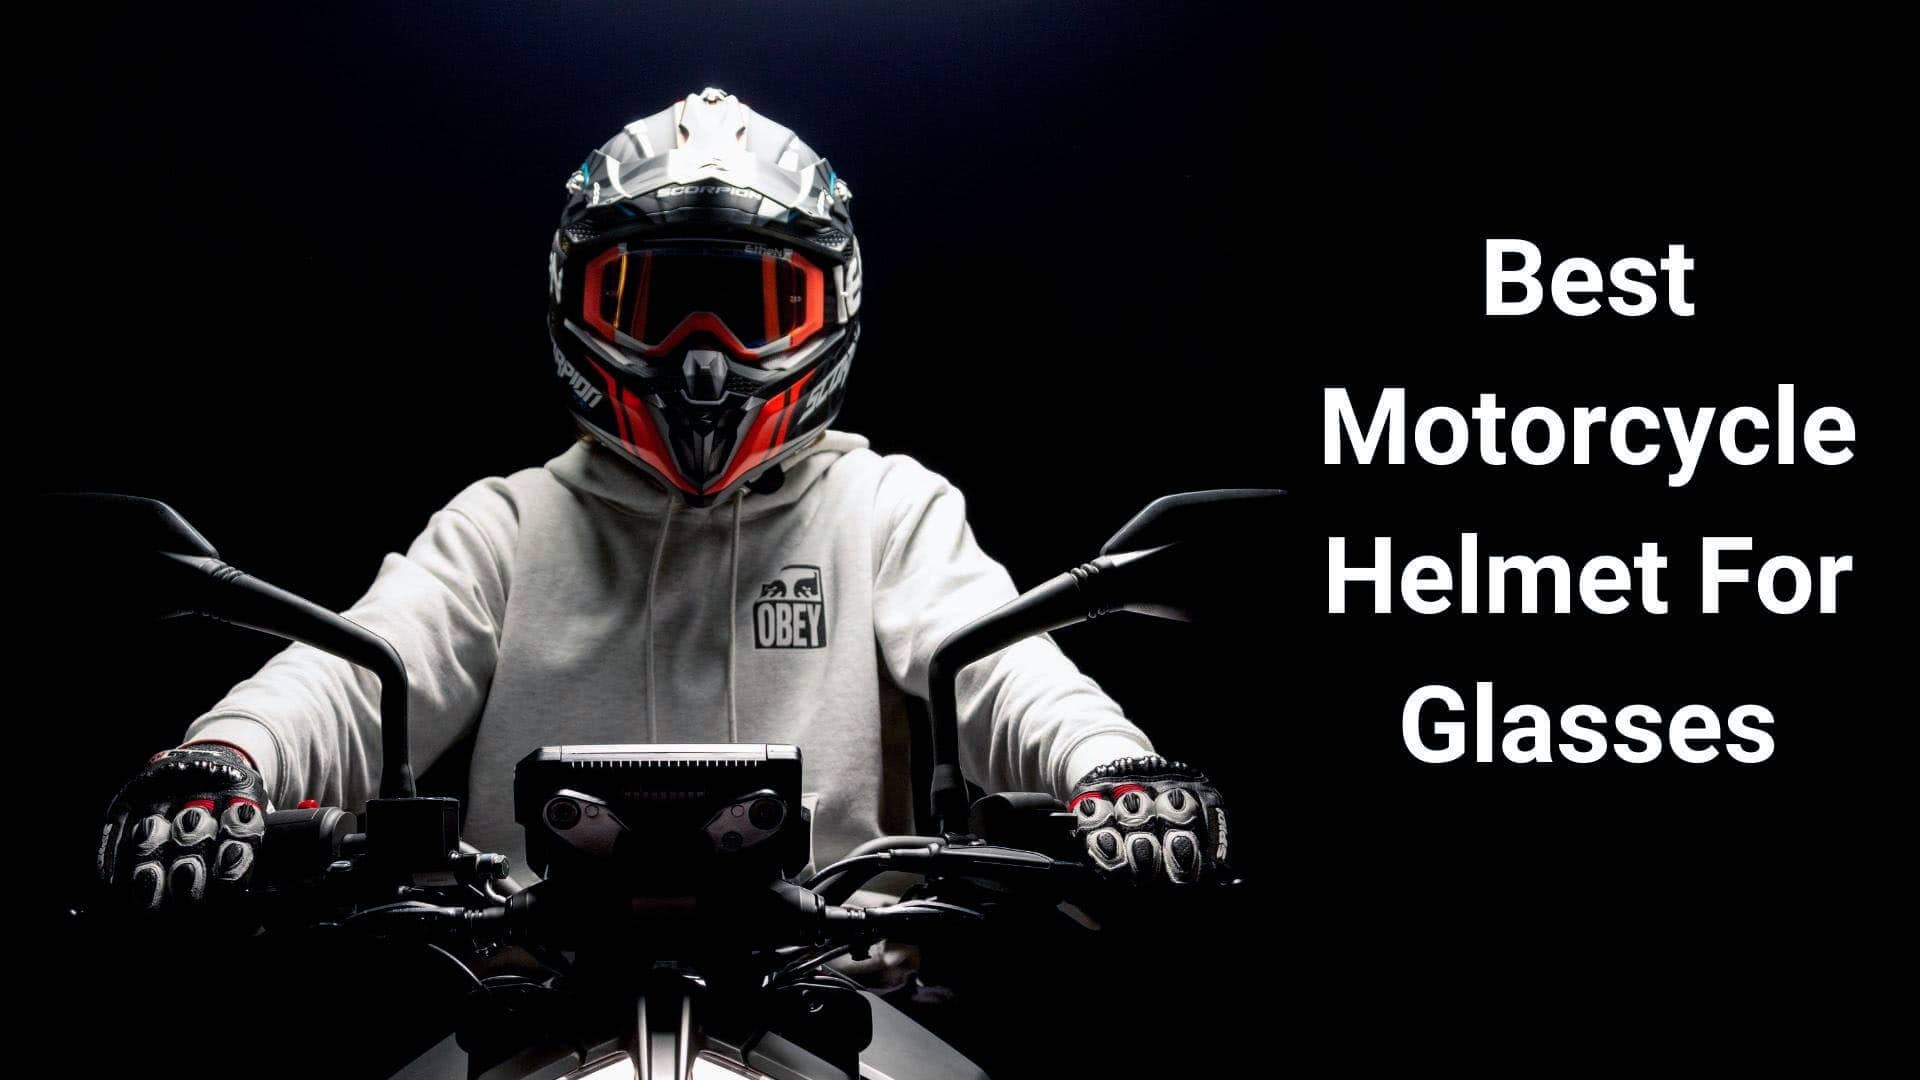 Find The Best Motorcycle Helmet for Glasses!